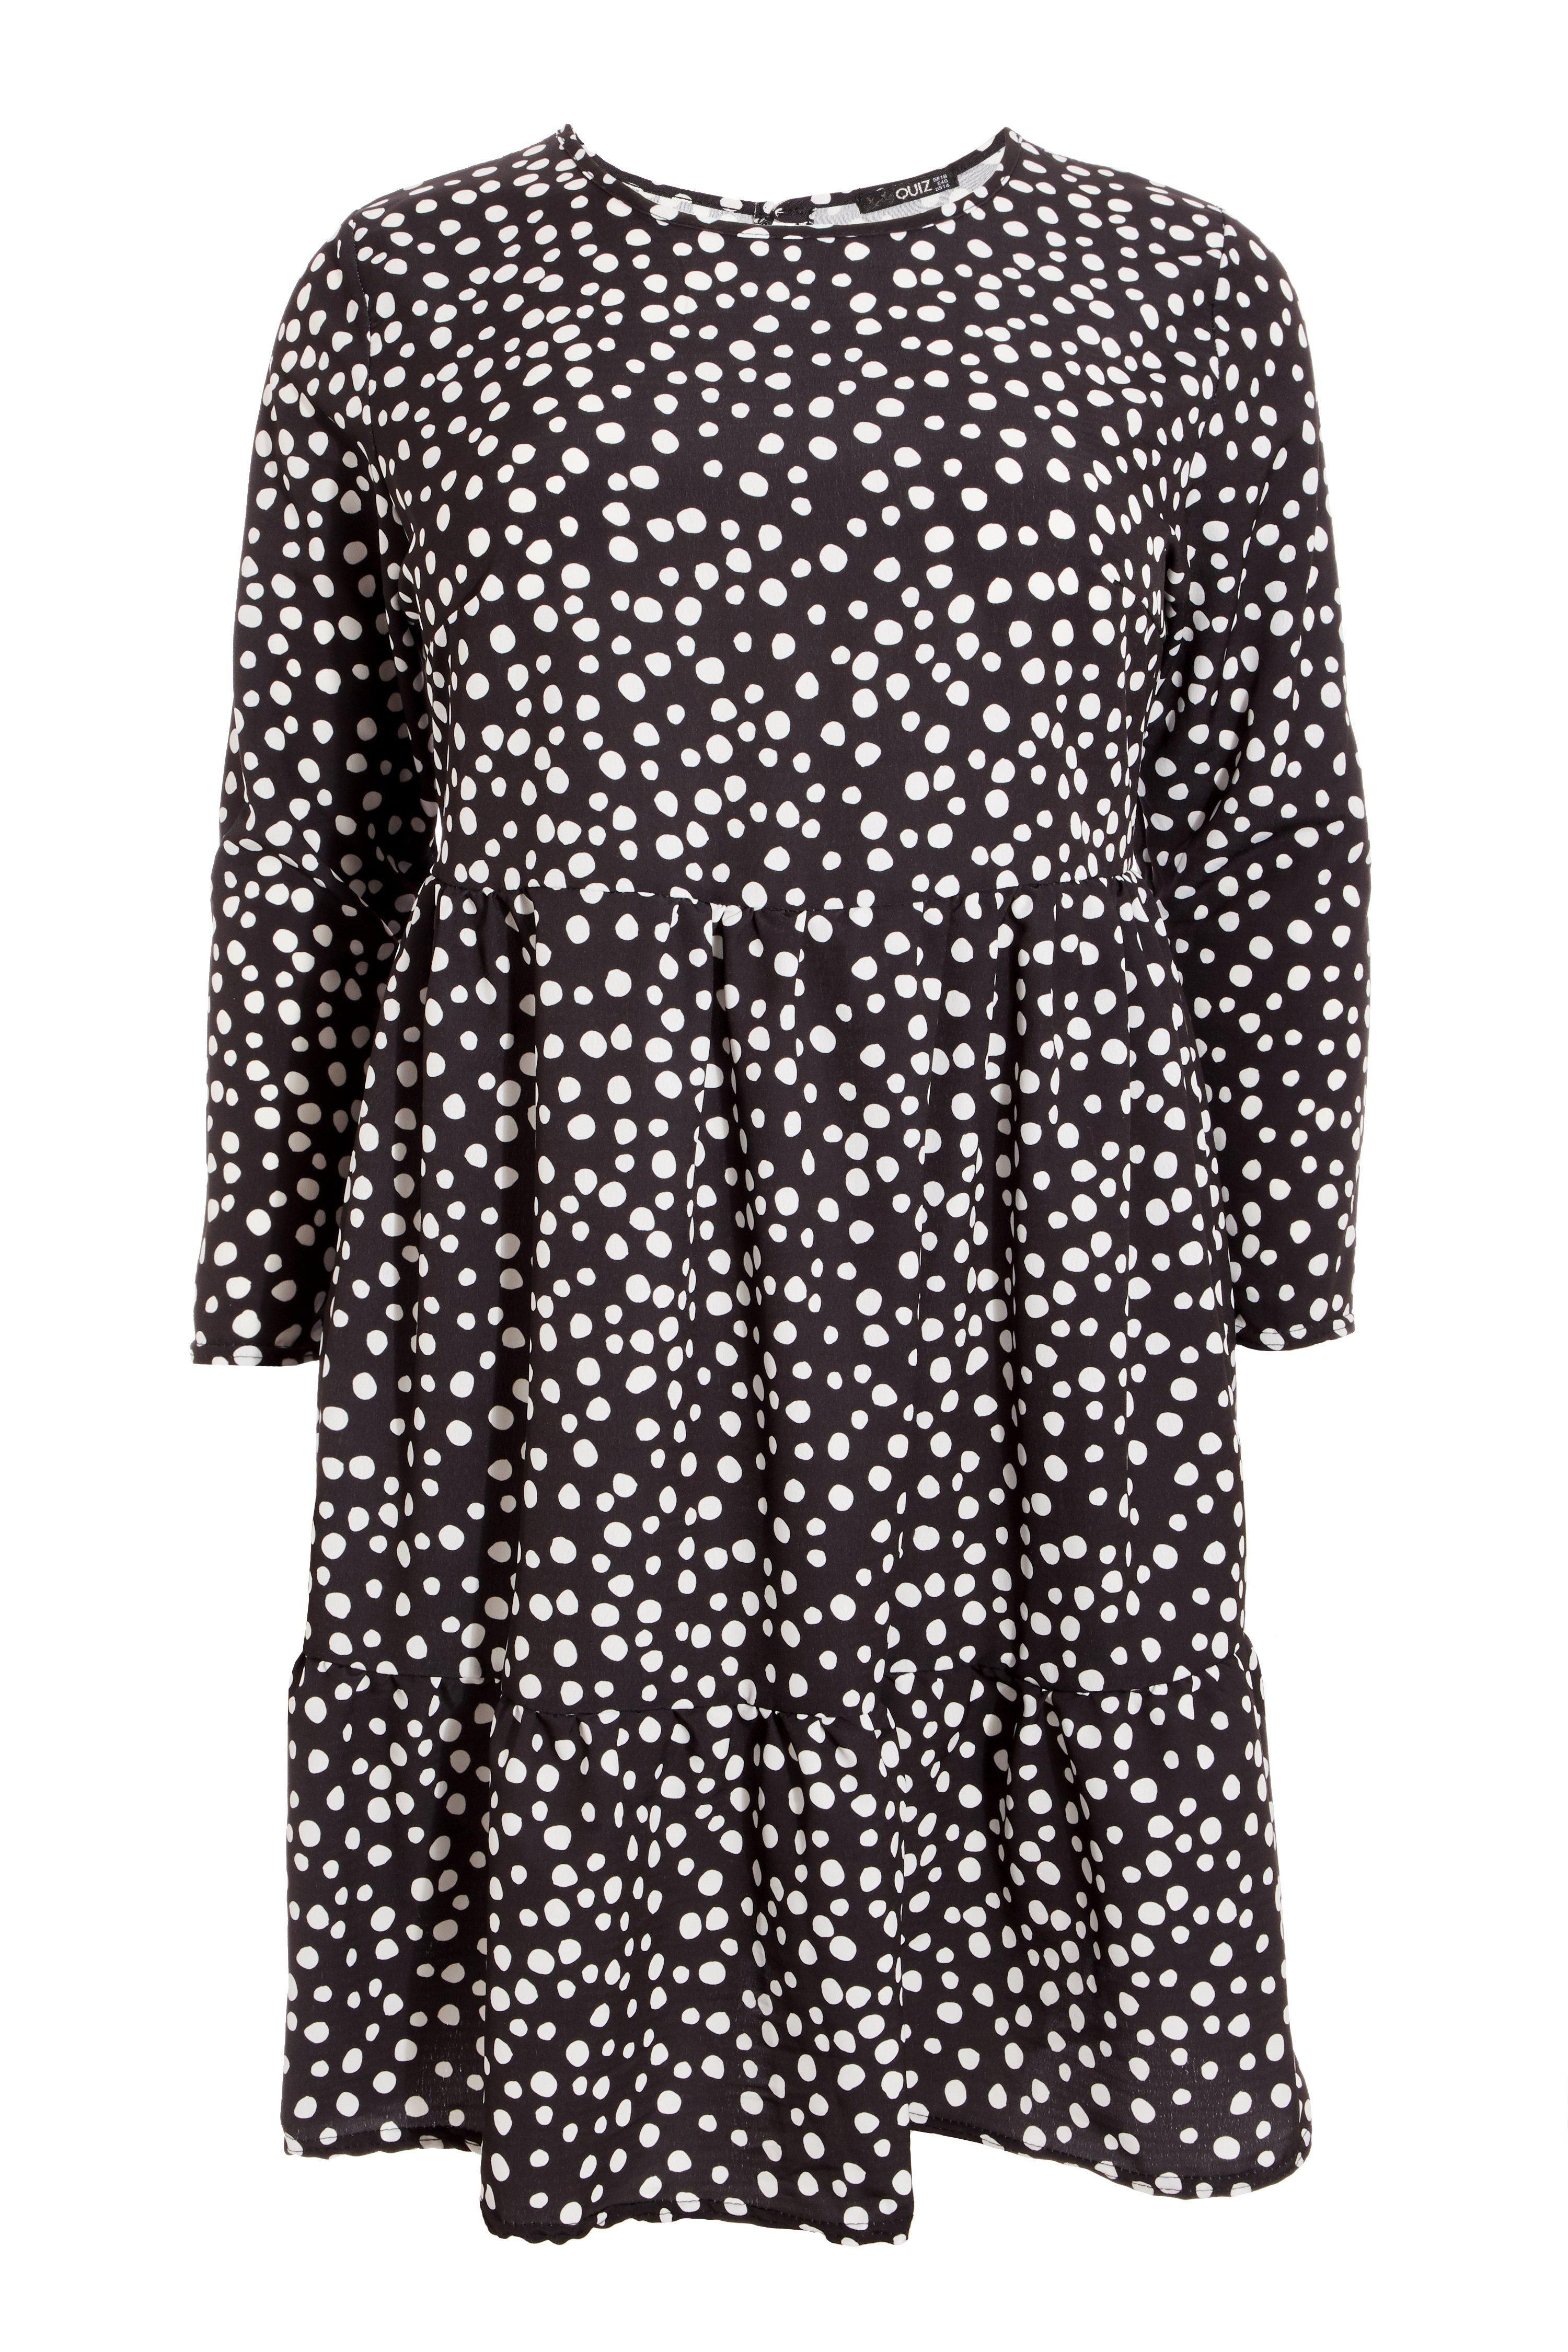 - Curve collection  - Polka dot print  - Tiered dress  - Smock style   - Length: 110cm approx  - Model Height: 5' 10